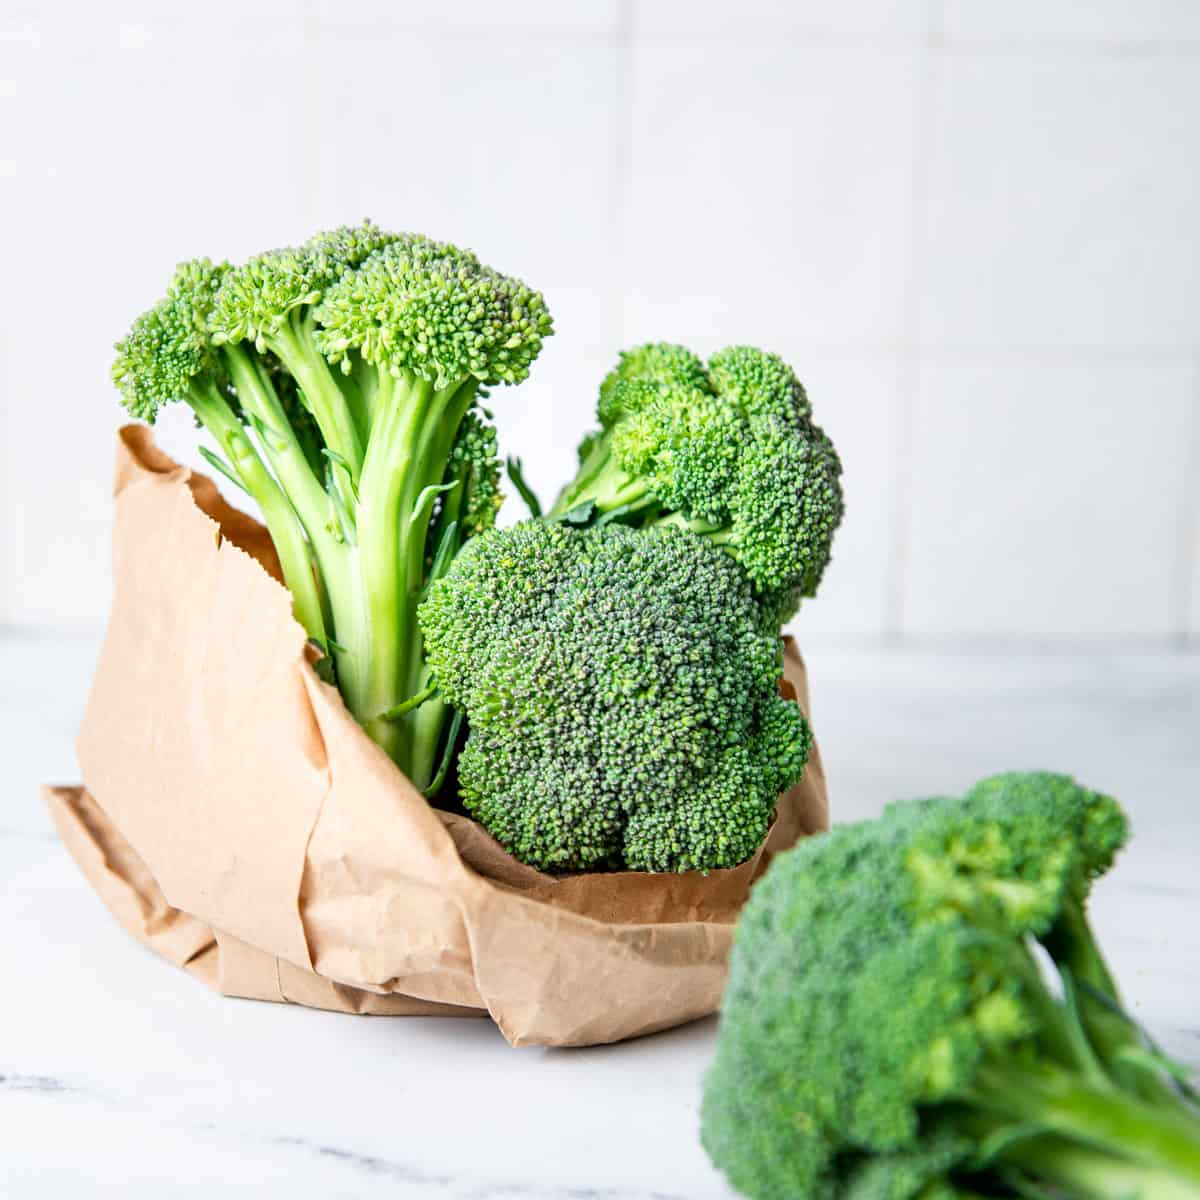 Broccoli in a paper bag on a counter.